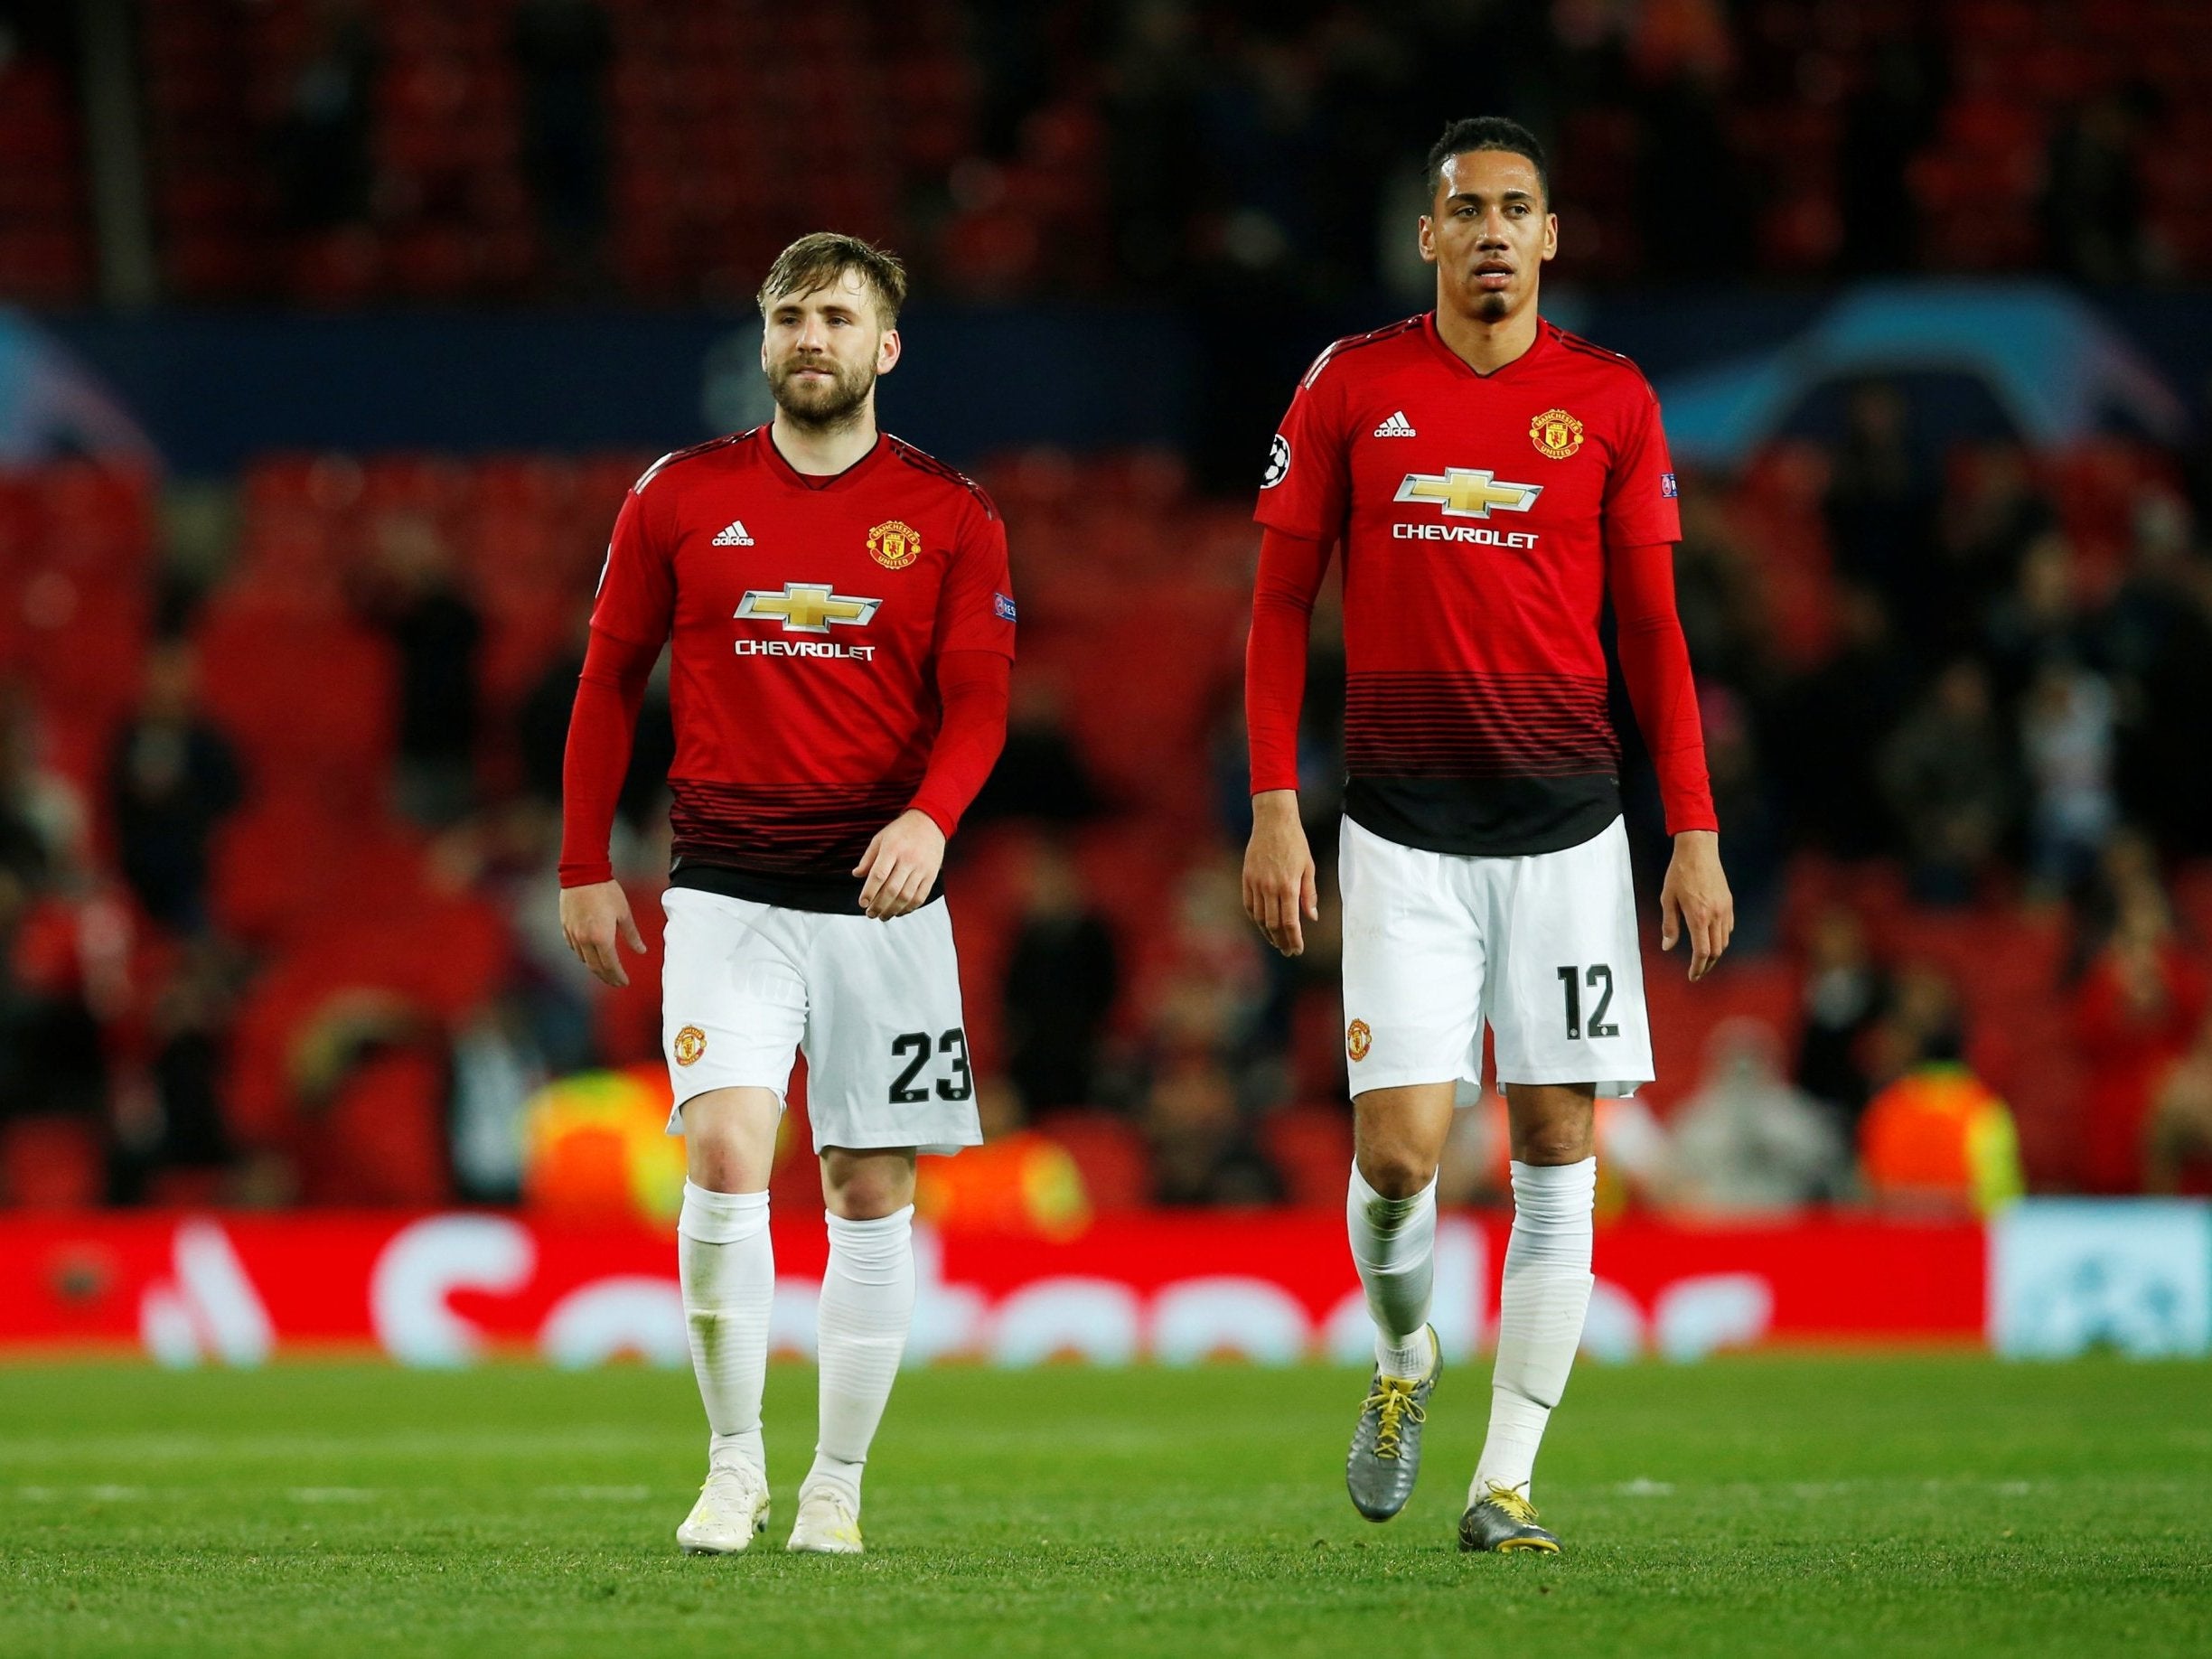 Manchester United were left frustrated by defeat